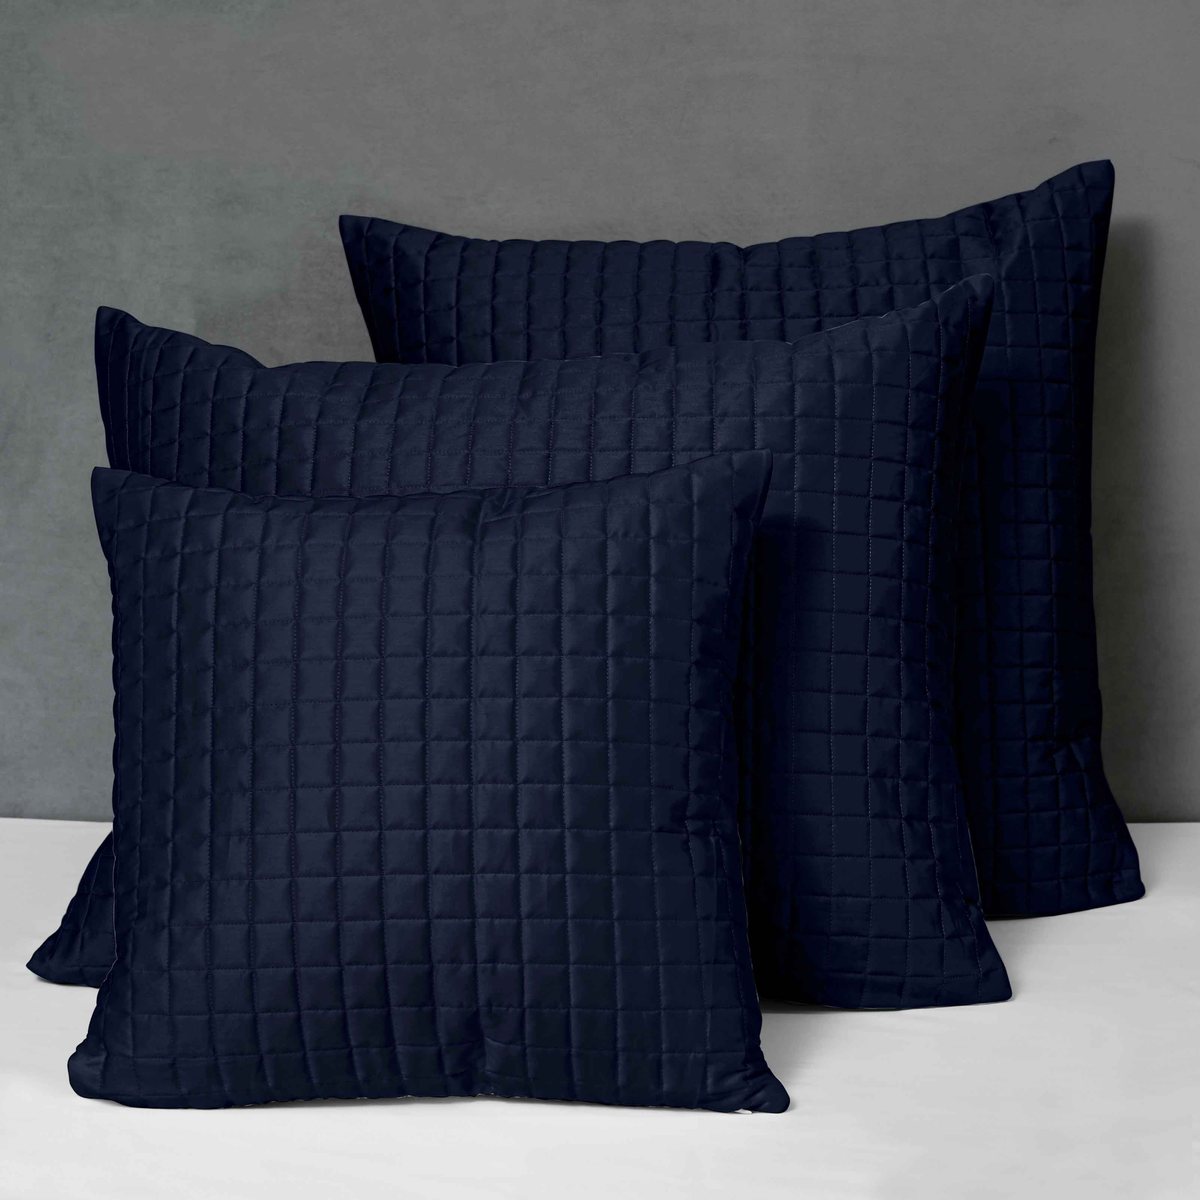 Different Sizes of Quilted Shams of Signoria Masaccio Bedding in Midnight Blue Color